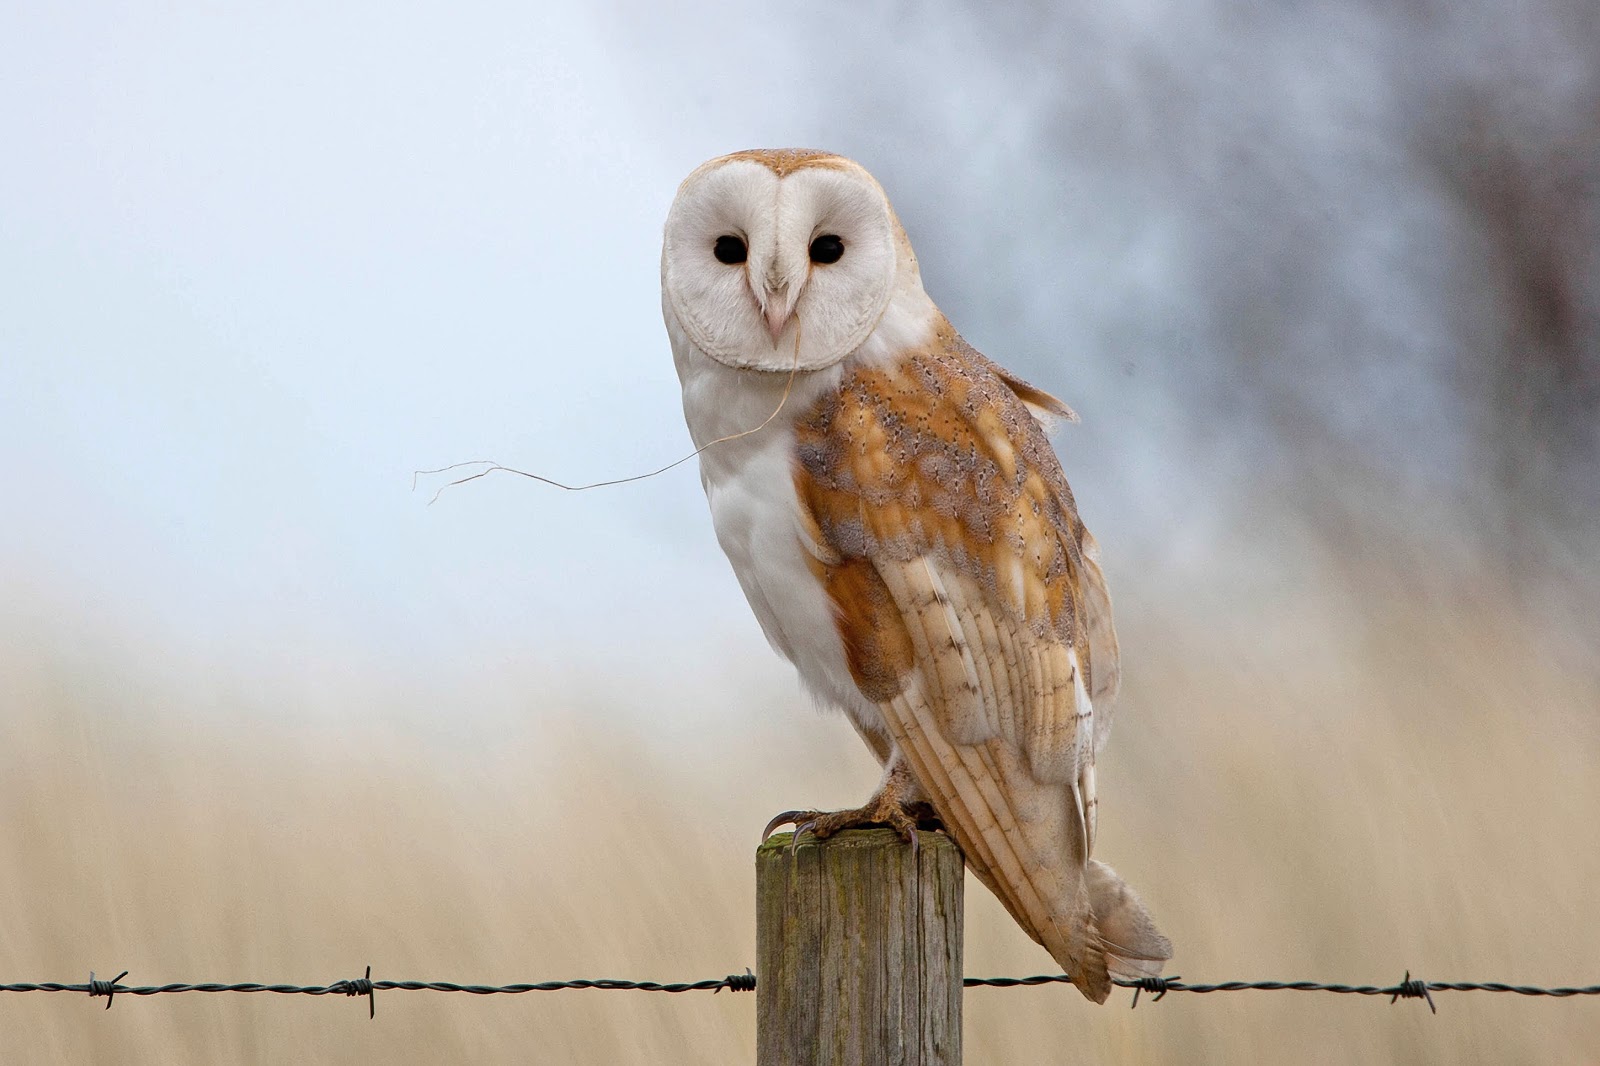 Barn owl phone wallpaper 1080P 2k 4k Full HD Wallpapers Backgrounds  Free Download  Wallpaper Crafter